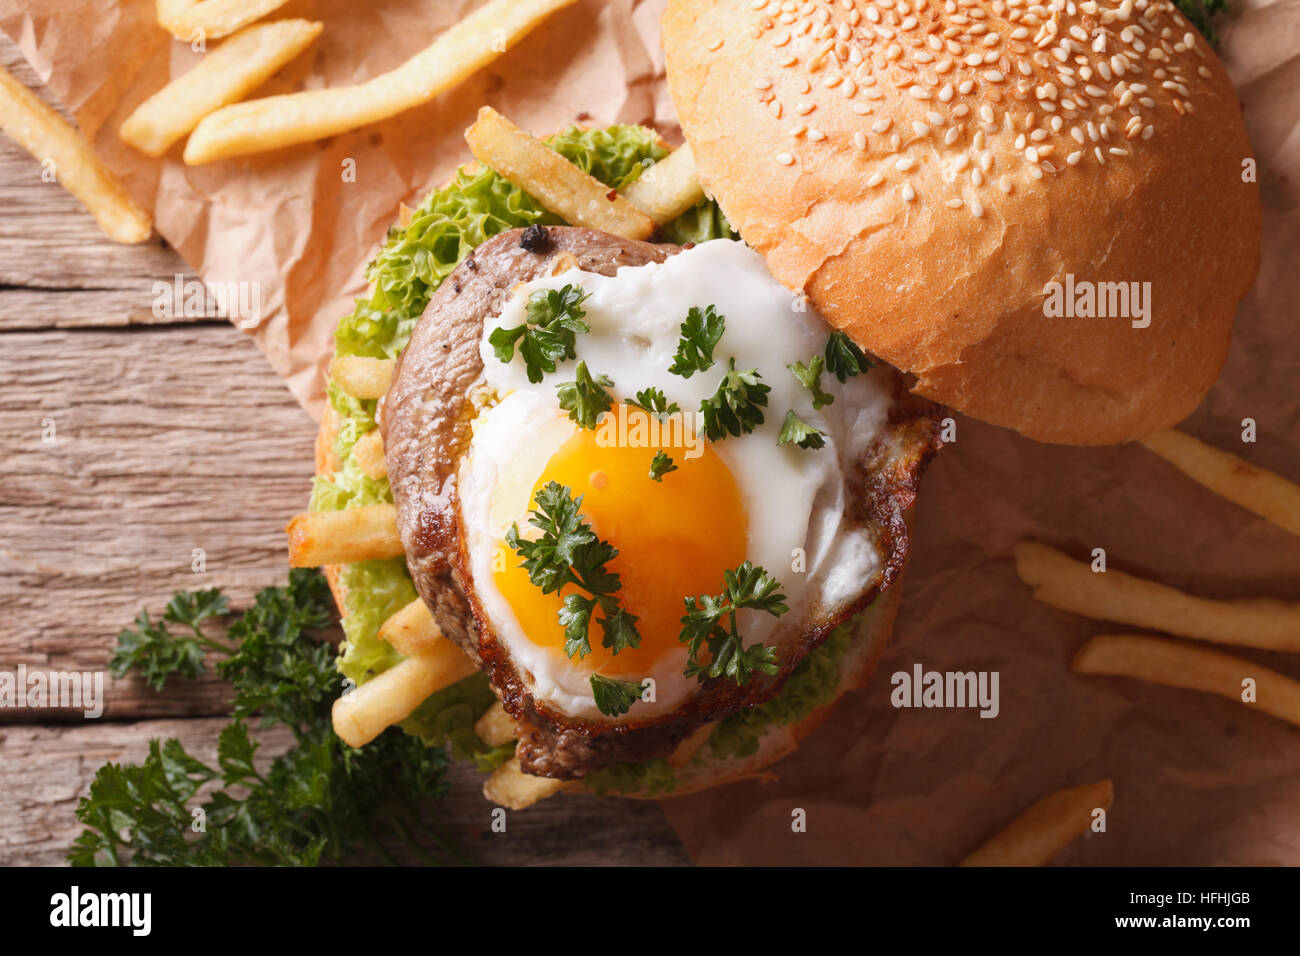 sandwich with grilled meat, a fried egg and French fries close-up. horizontal view from above Stock Photo